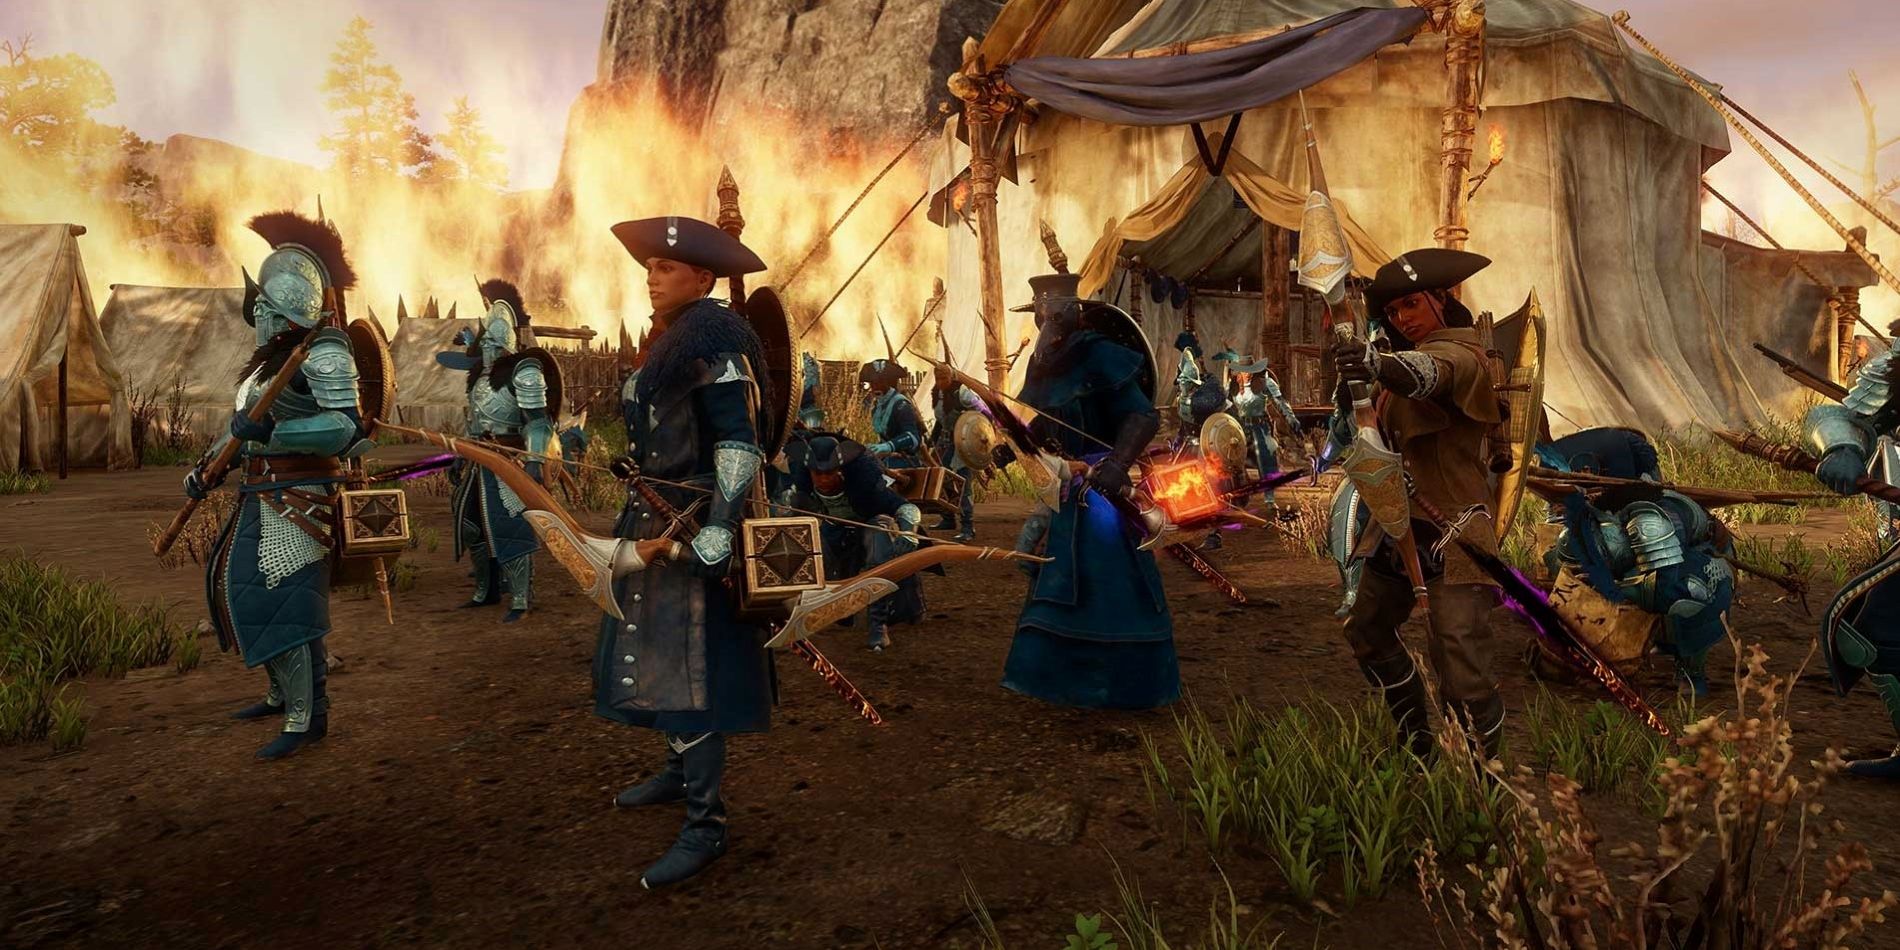 Players lining up for a war in New World.